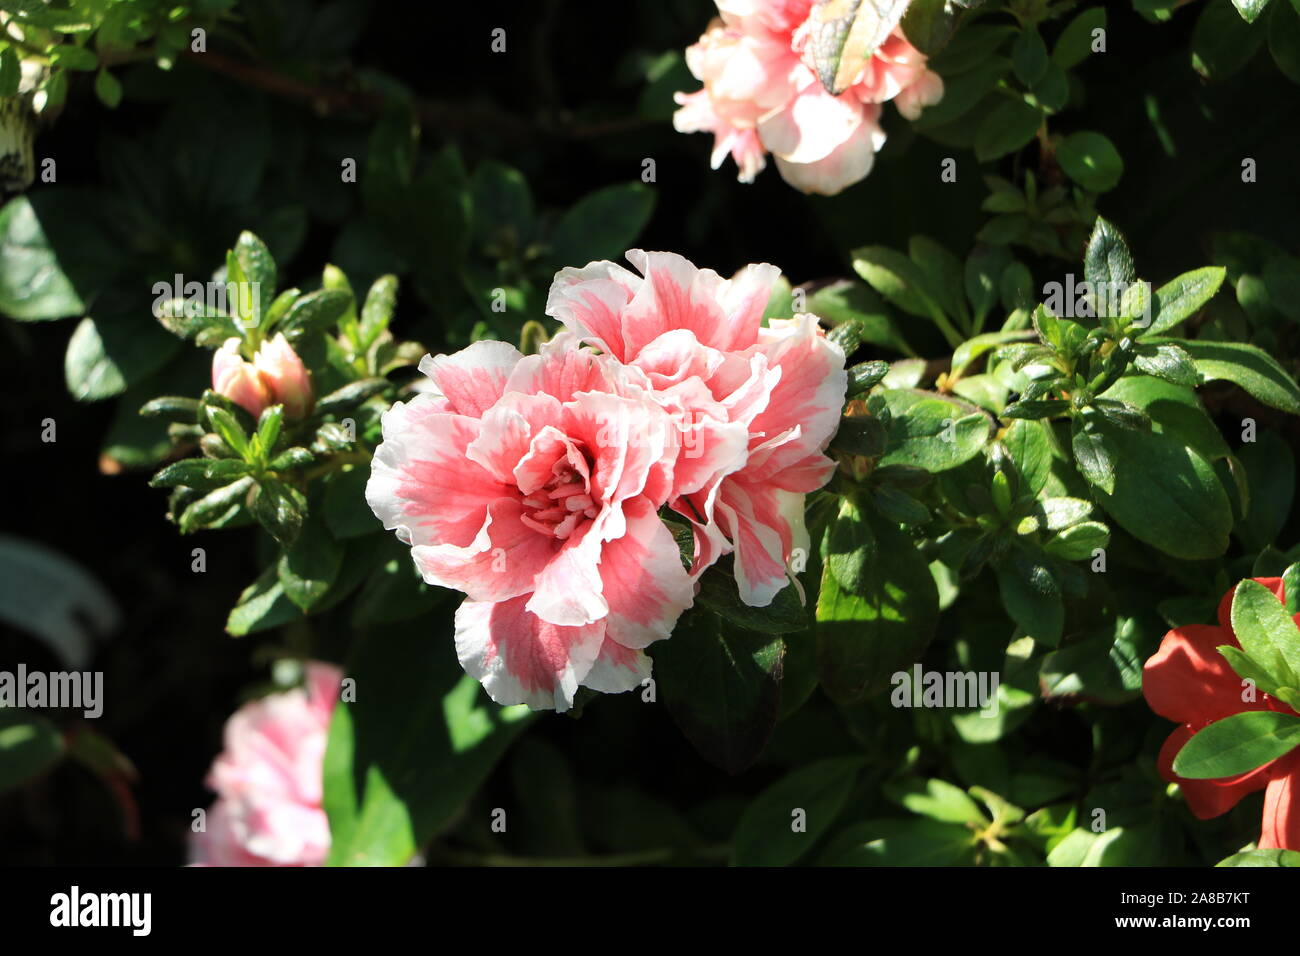 Beautiful Pink and White Petaled Flower Stock Photo